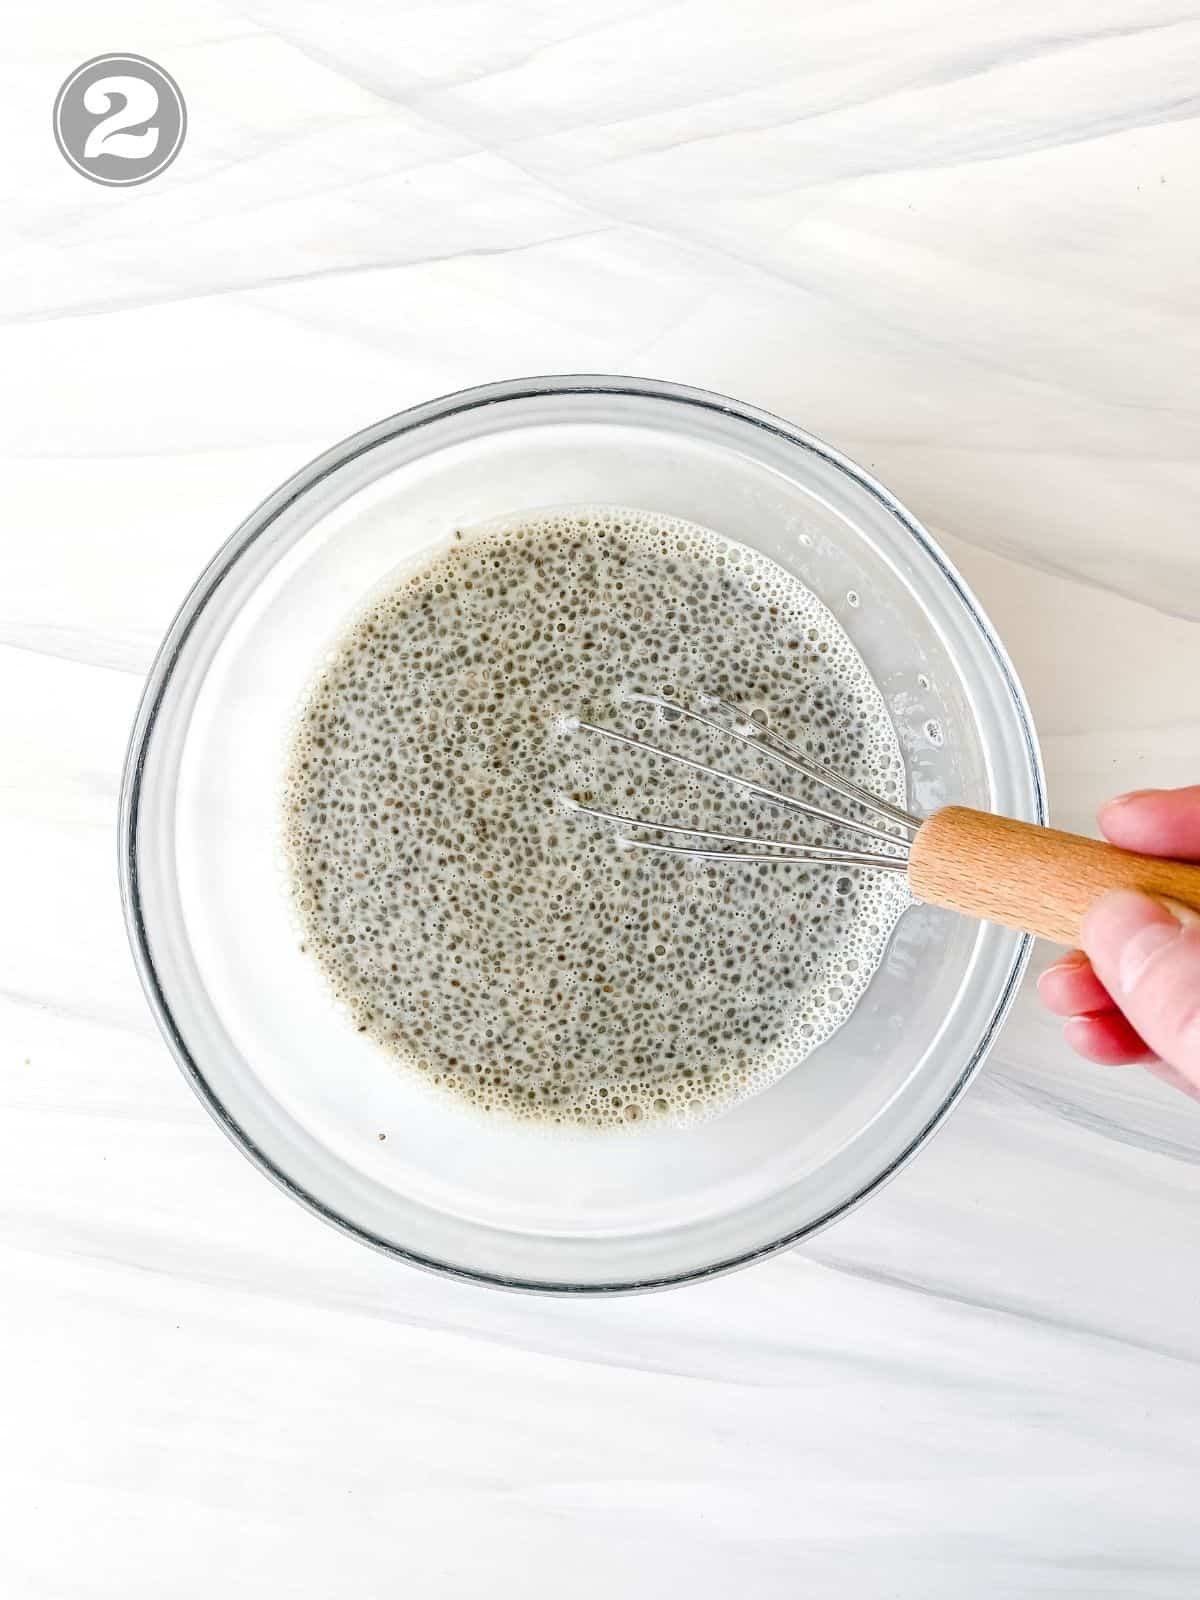 set chia pudding in a glass bowl.